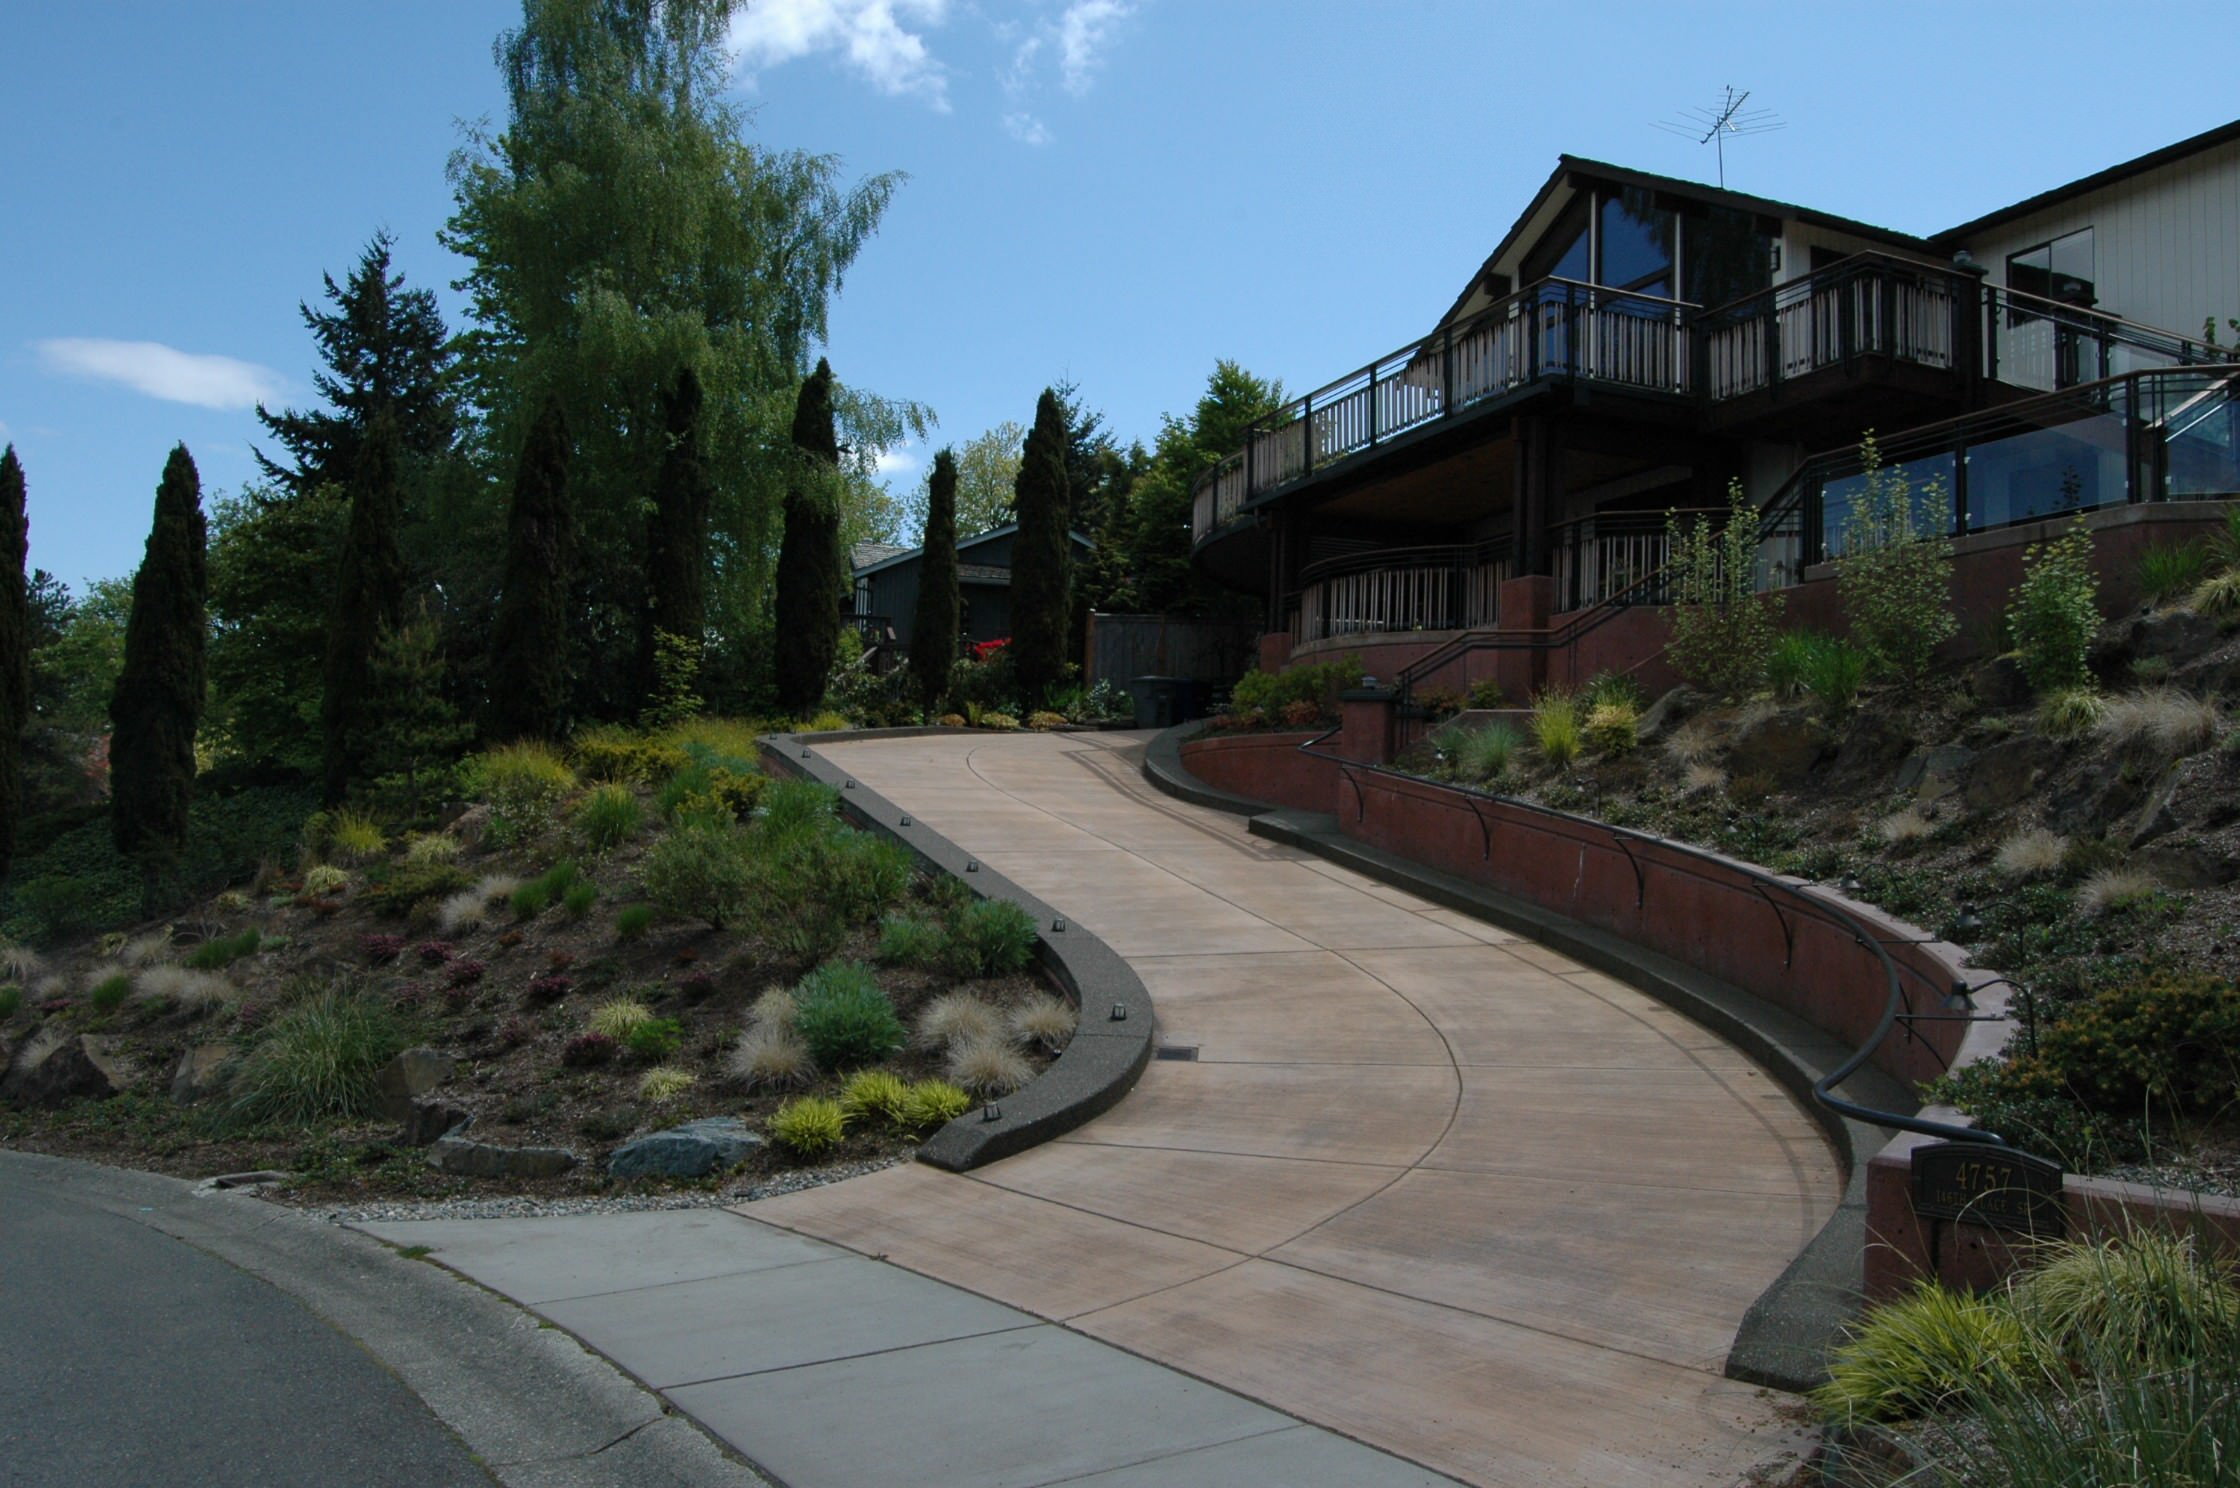 Curved driveway up to lower level garage and entry stairway